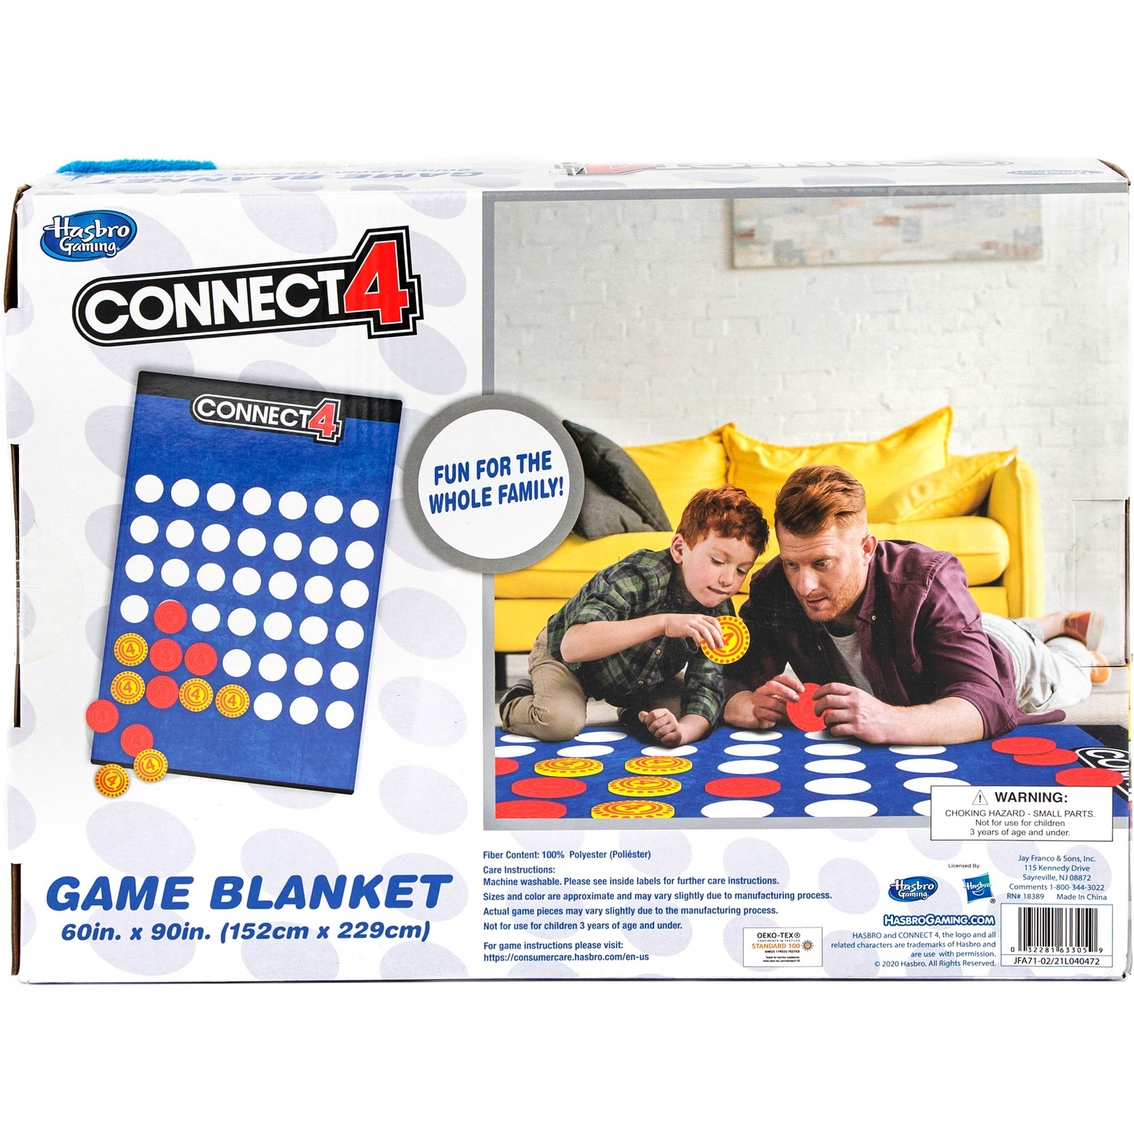 Hasbro Connect 4 Game Blanket 60 x 90 - Image 7 of 7